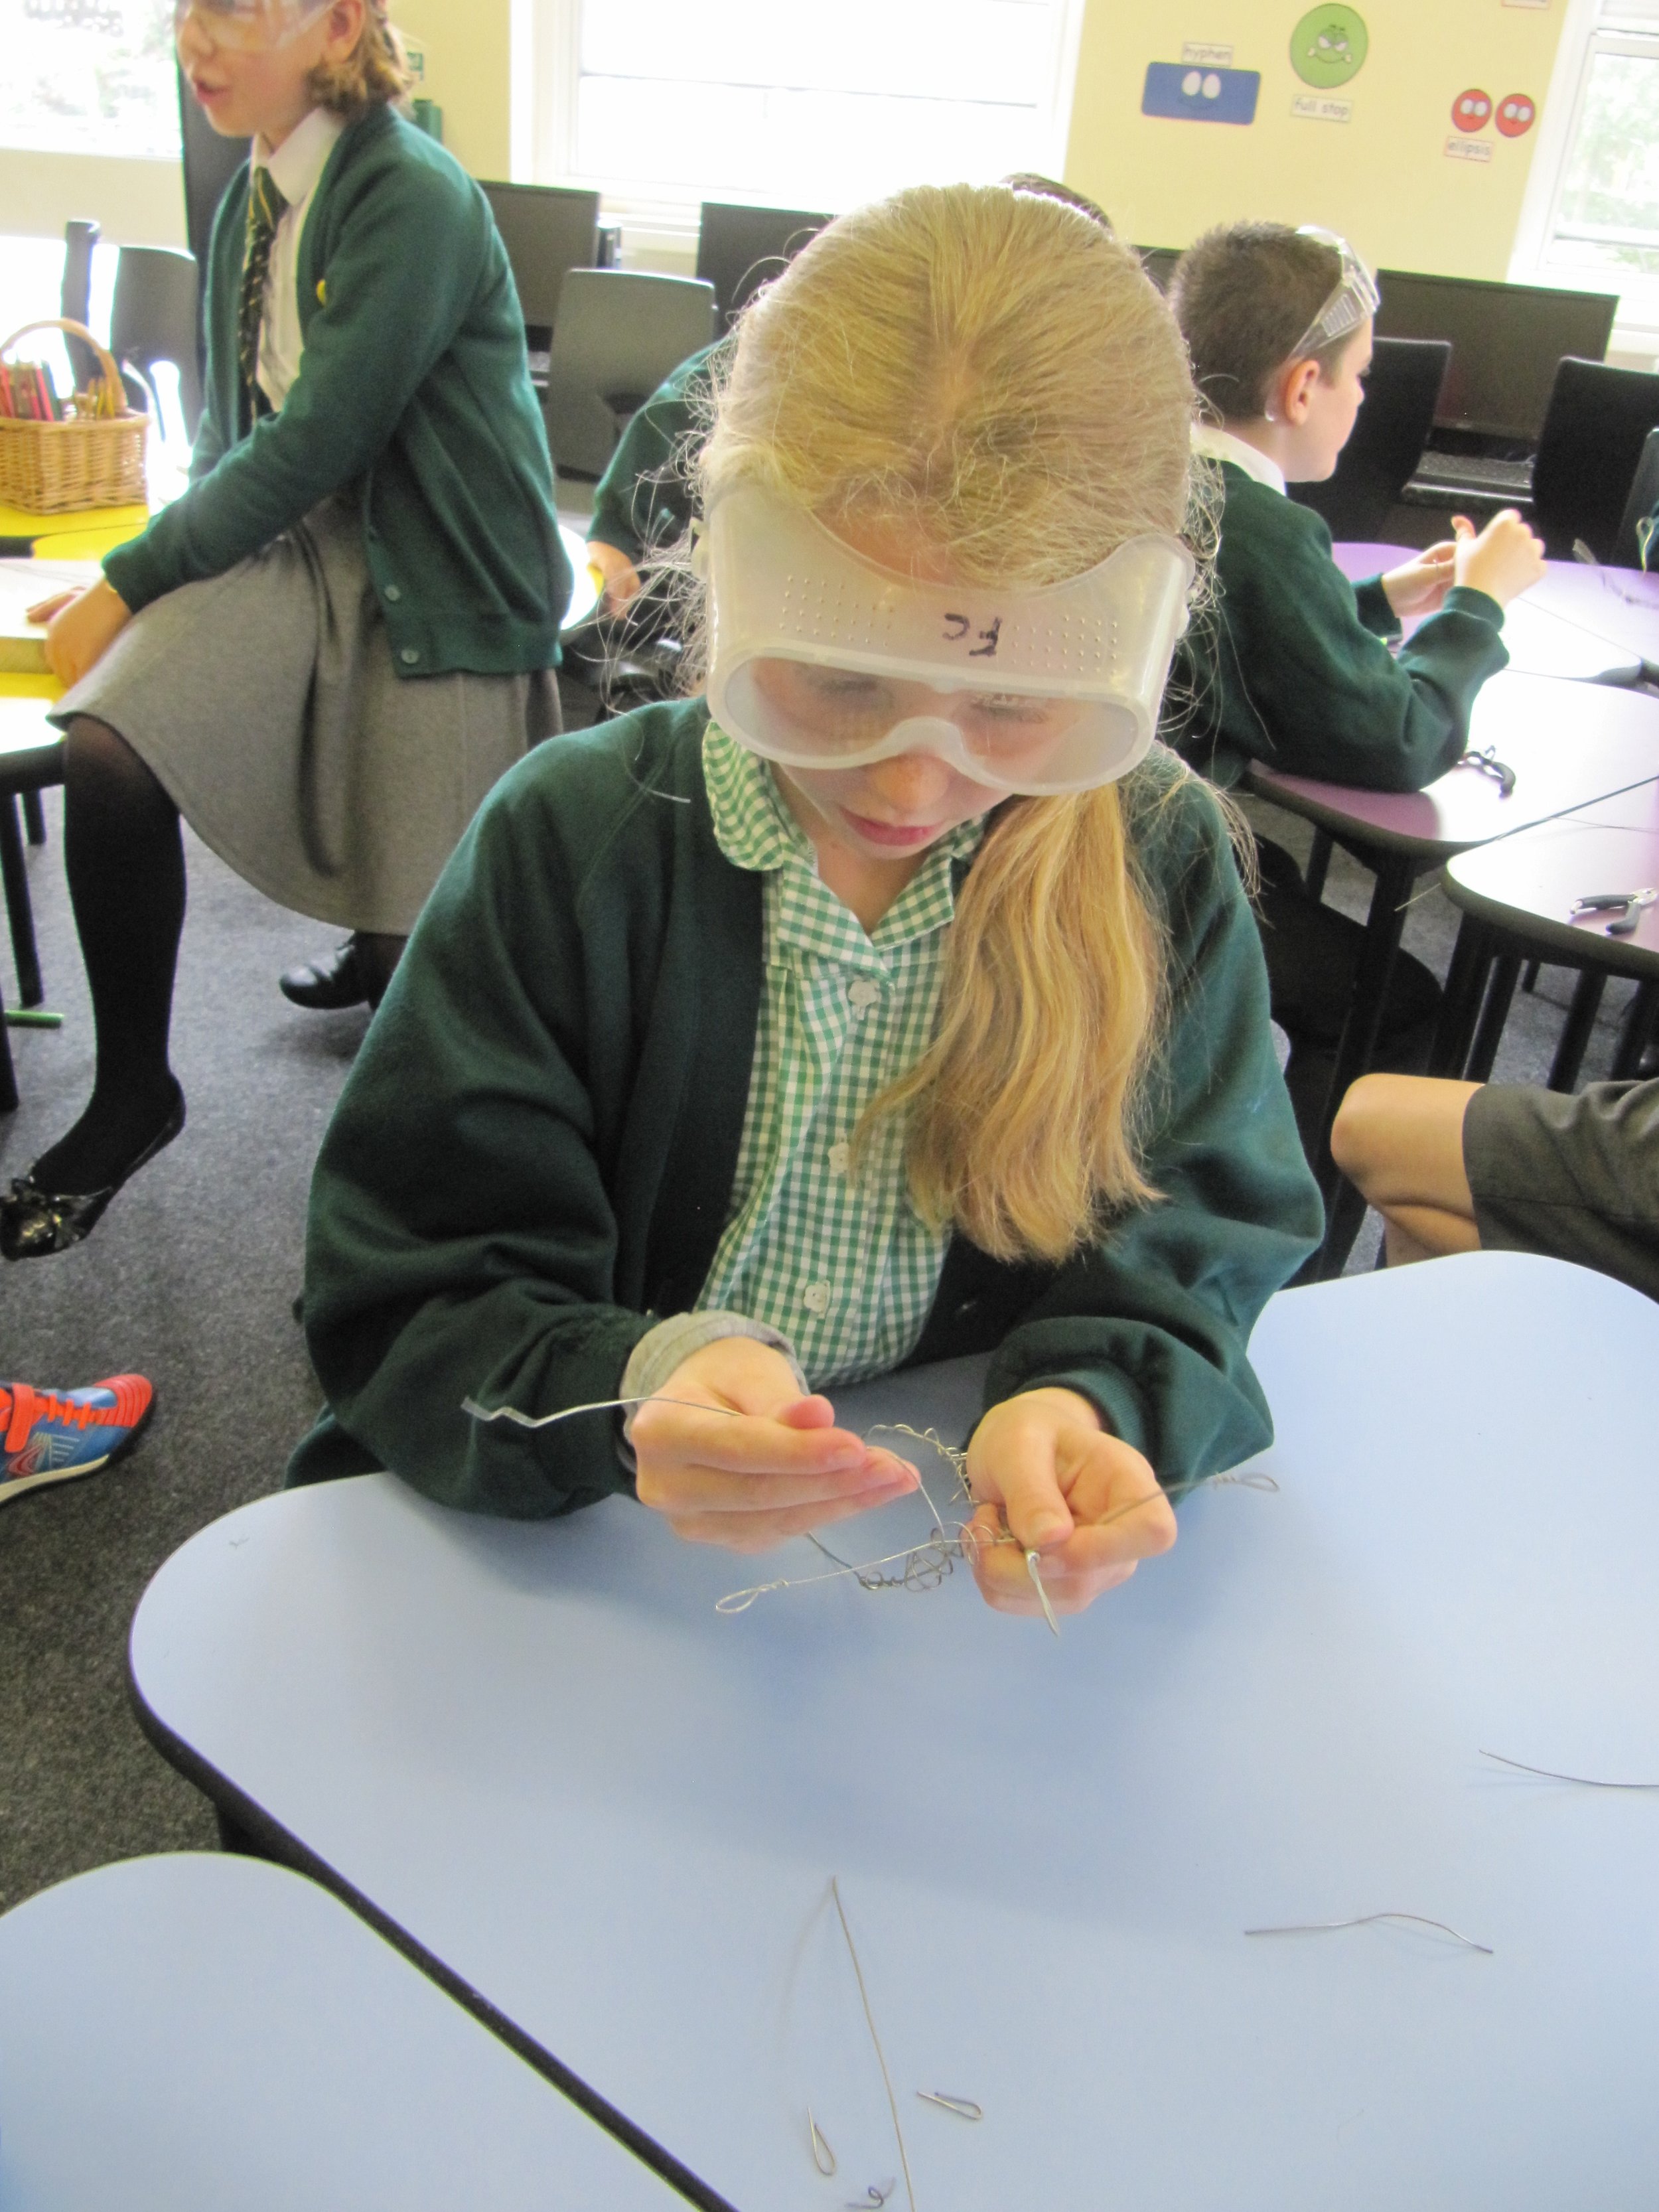 North Town Primary student making Giacometti-inspired figure